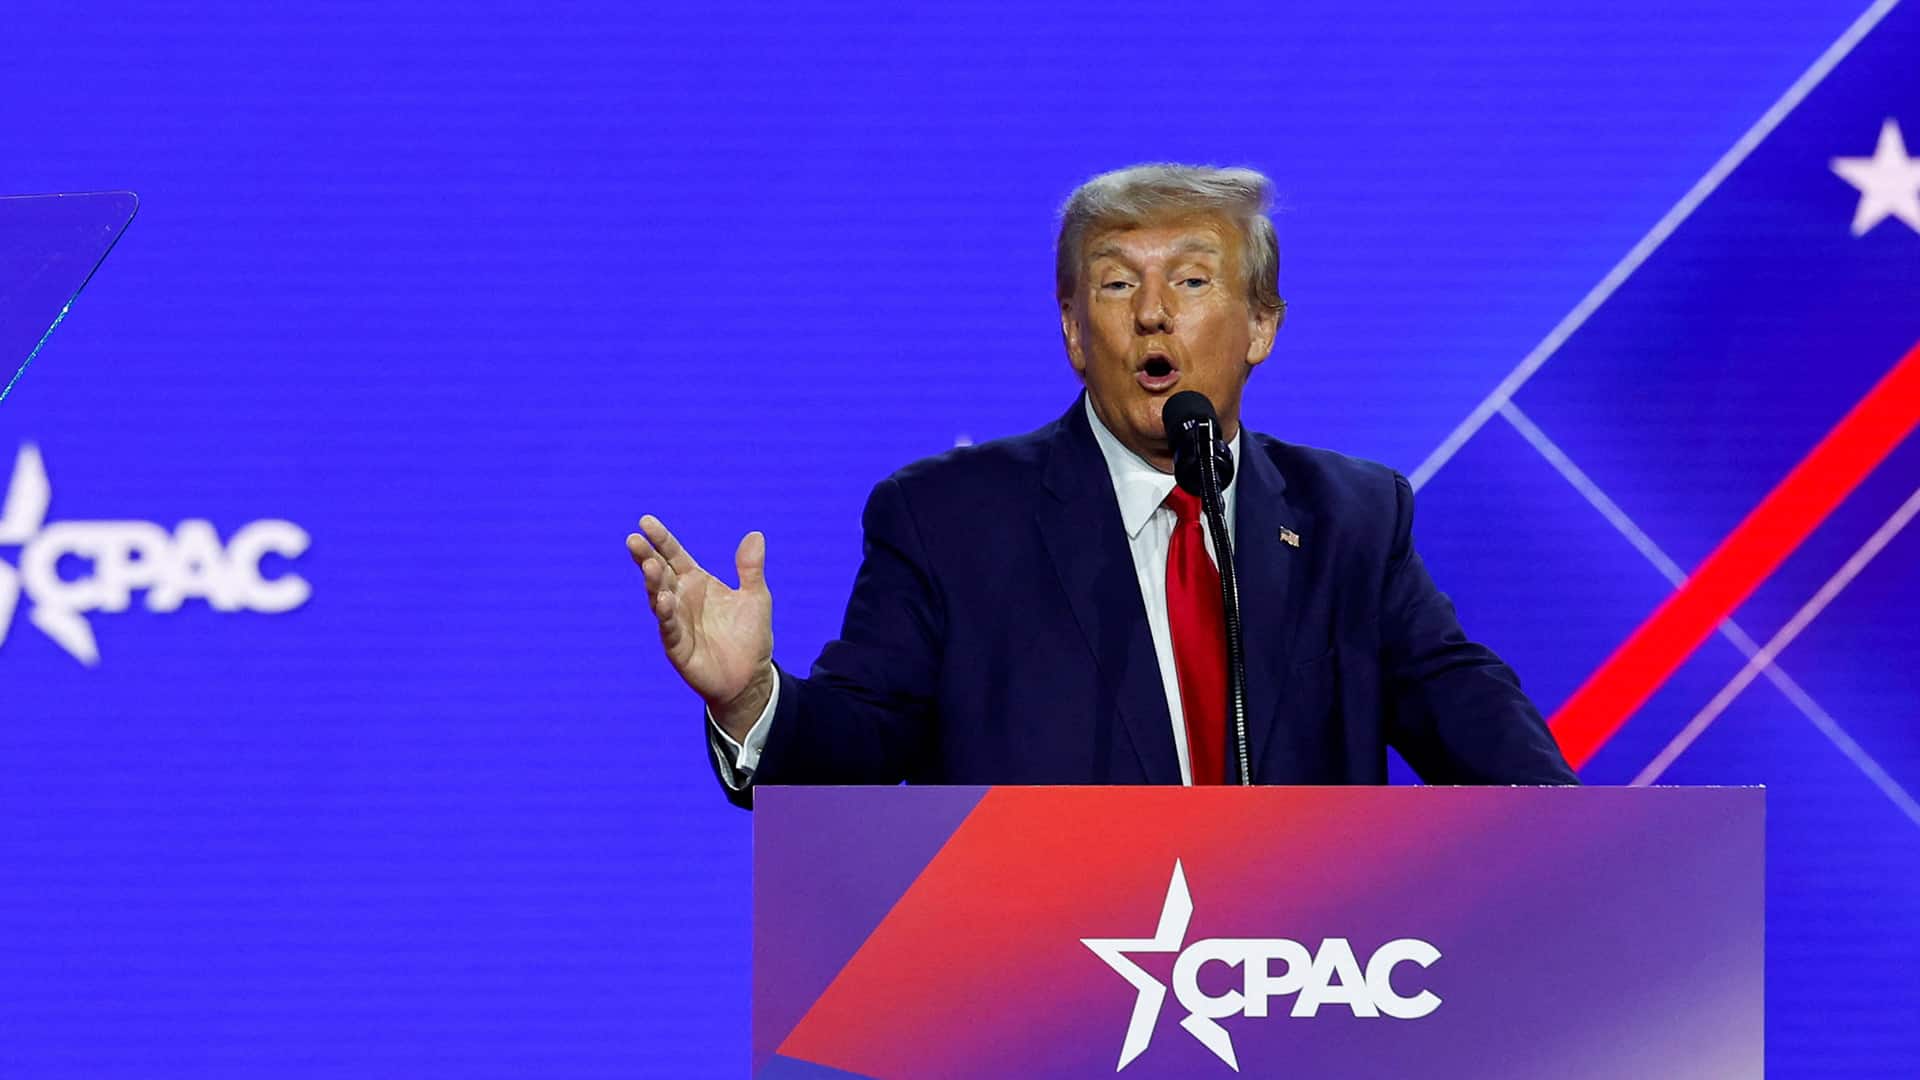 The Mike Church Show In Epic CPAC Speech, Trump Tells Libtards “You’re Fired And We Will Remove You!”